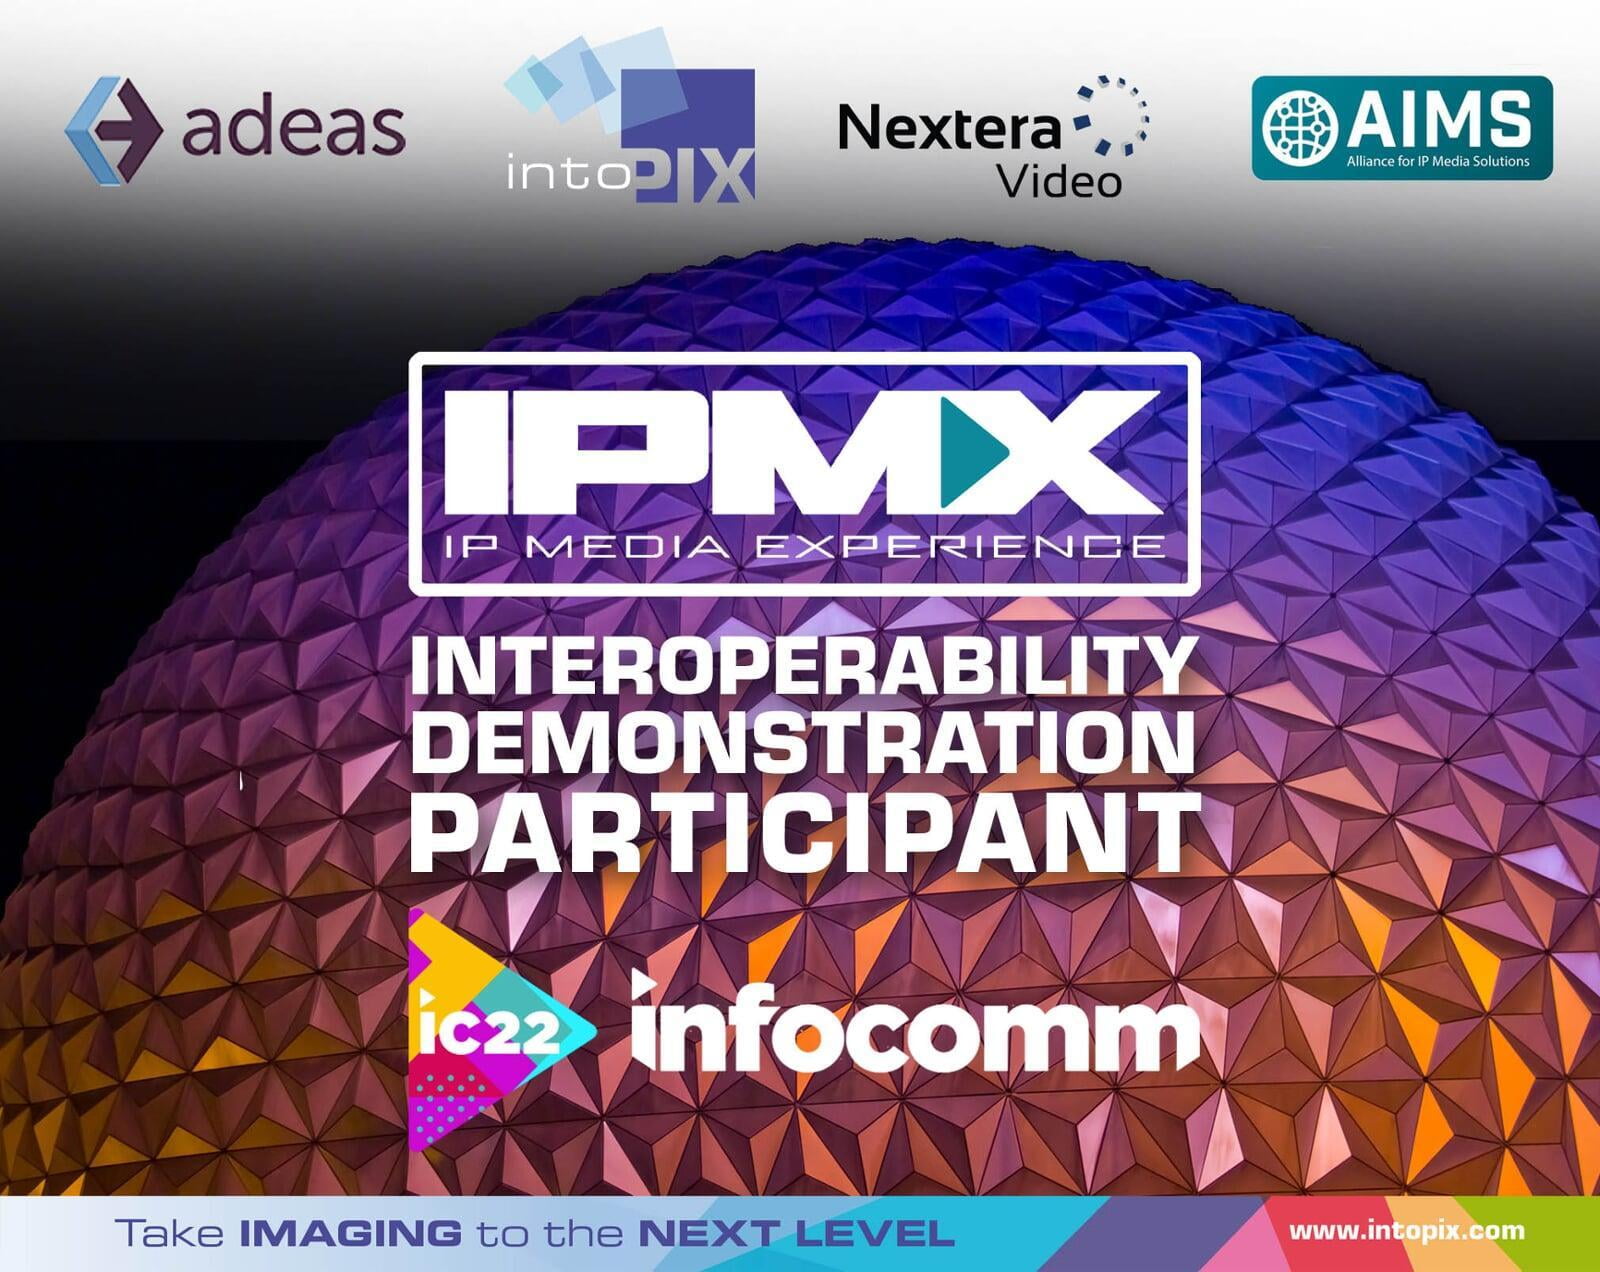 IntoPIX teams up with Nextera and Adeas to participate in live IPMX interoperability demonstrations at InfoComm 2022